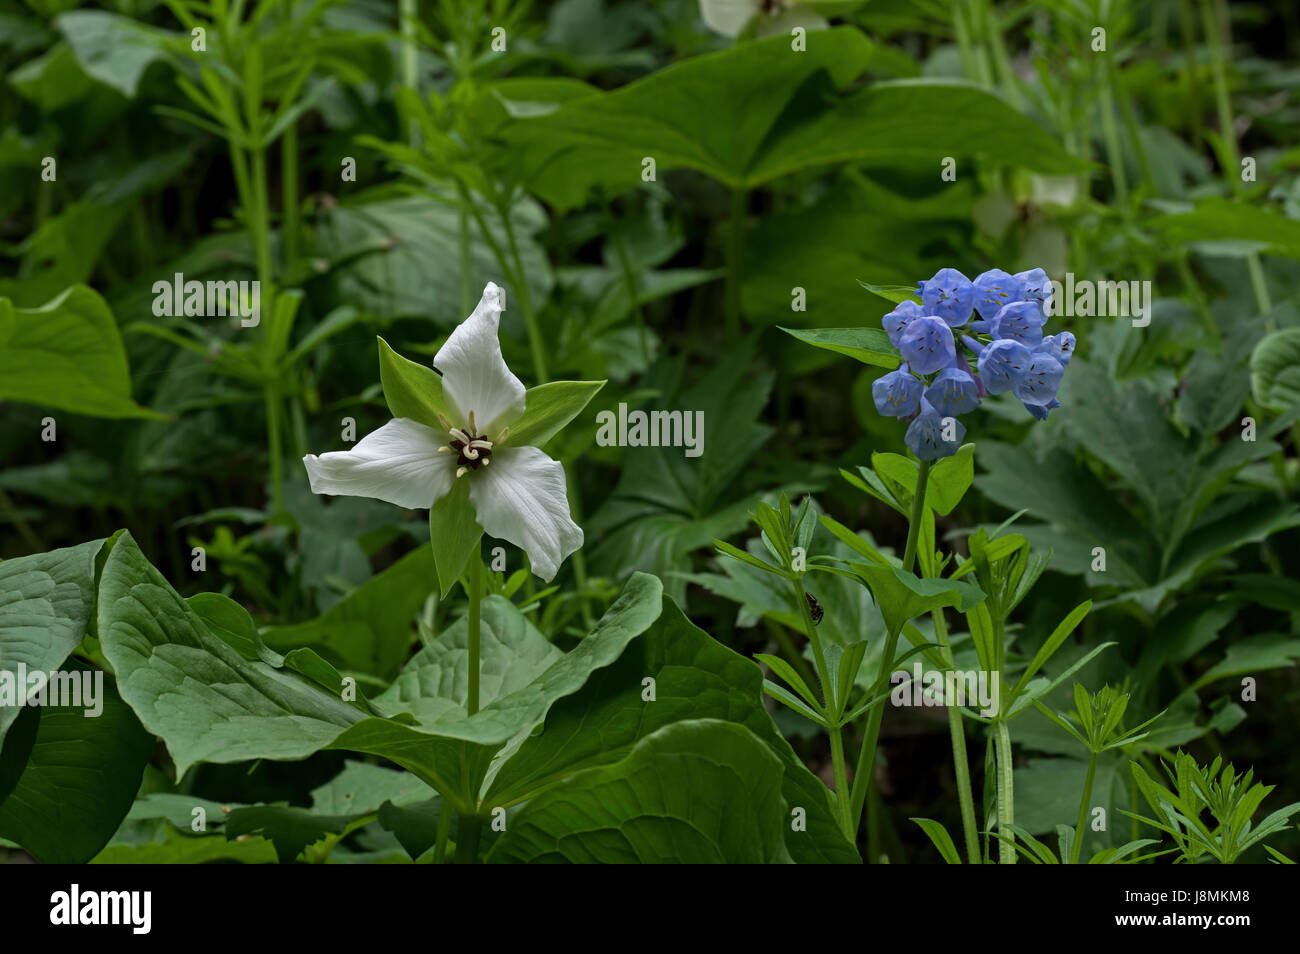 White Trillium or Trilliaceae and Mertensia virginica or Virginia Bluebell which is a spring ephemeral plant with bell-shaped sky-blue flowers, native Stock Photo